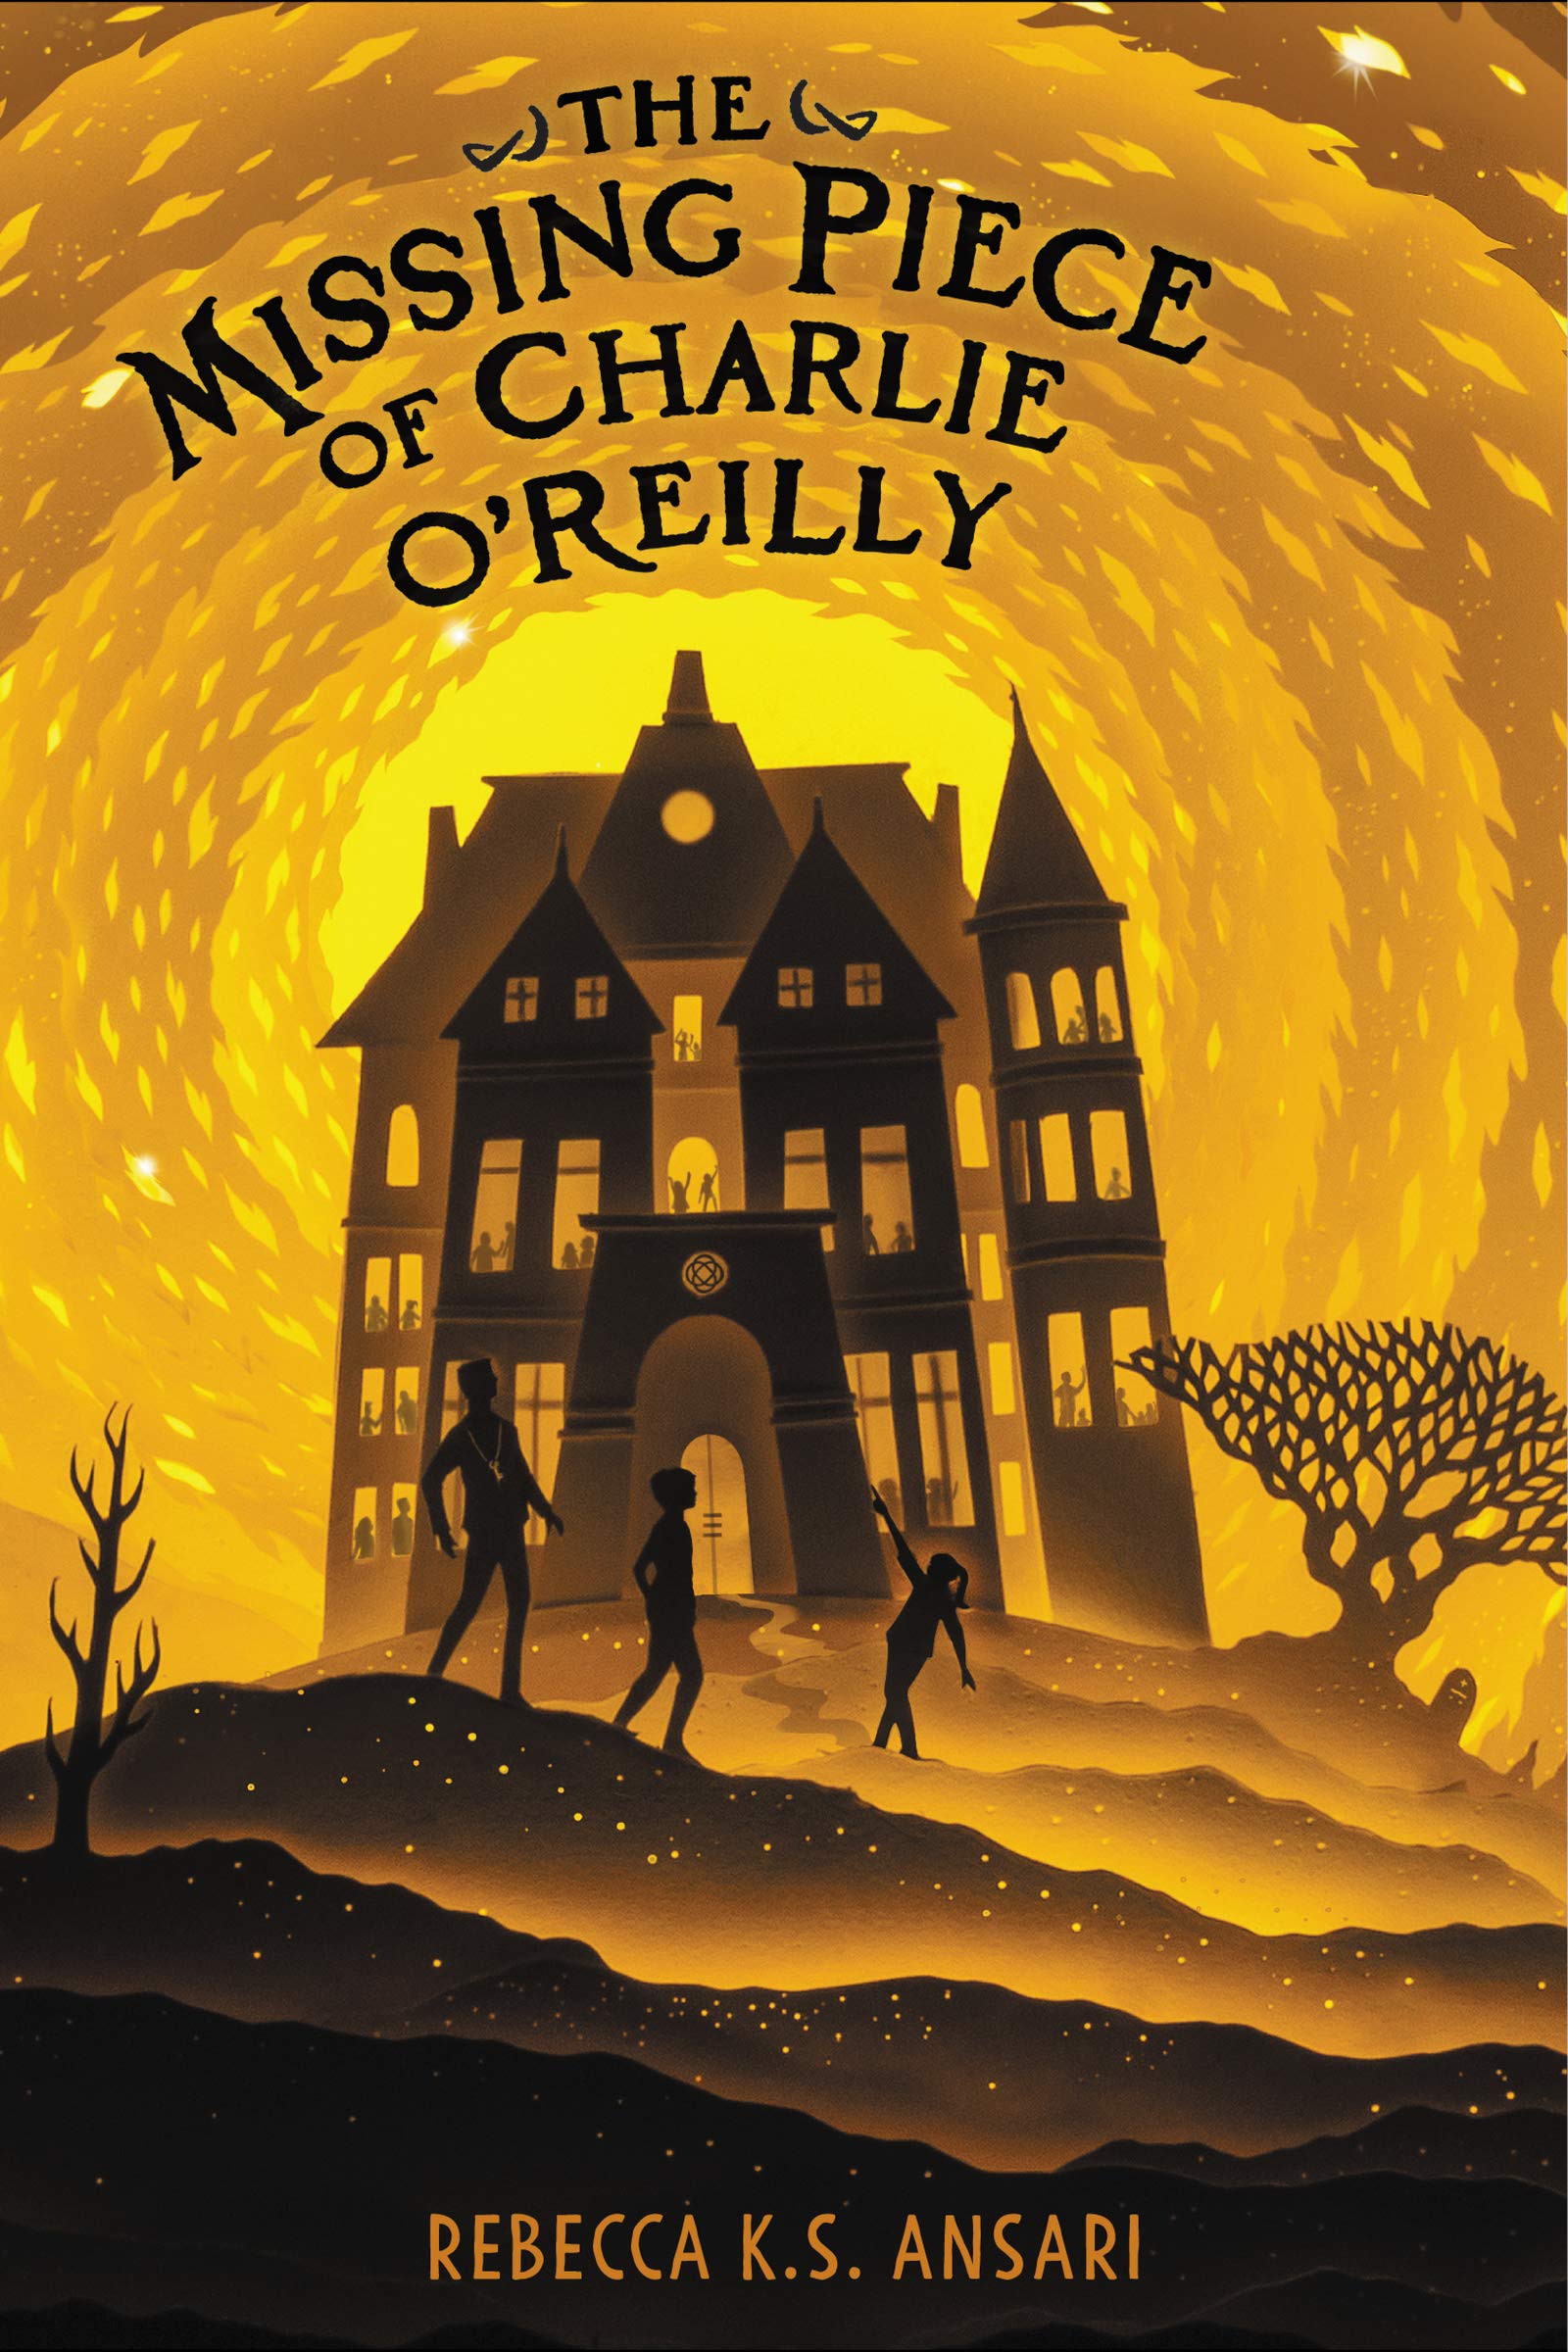 Middle Grade Book Club: The Missing Piece of Charlie O'Reilly